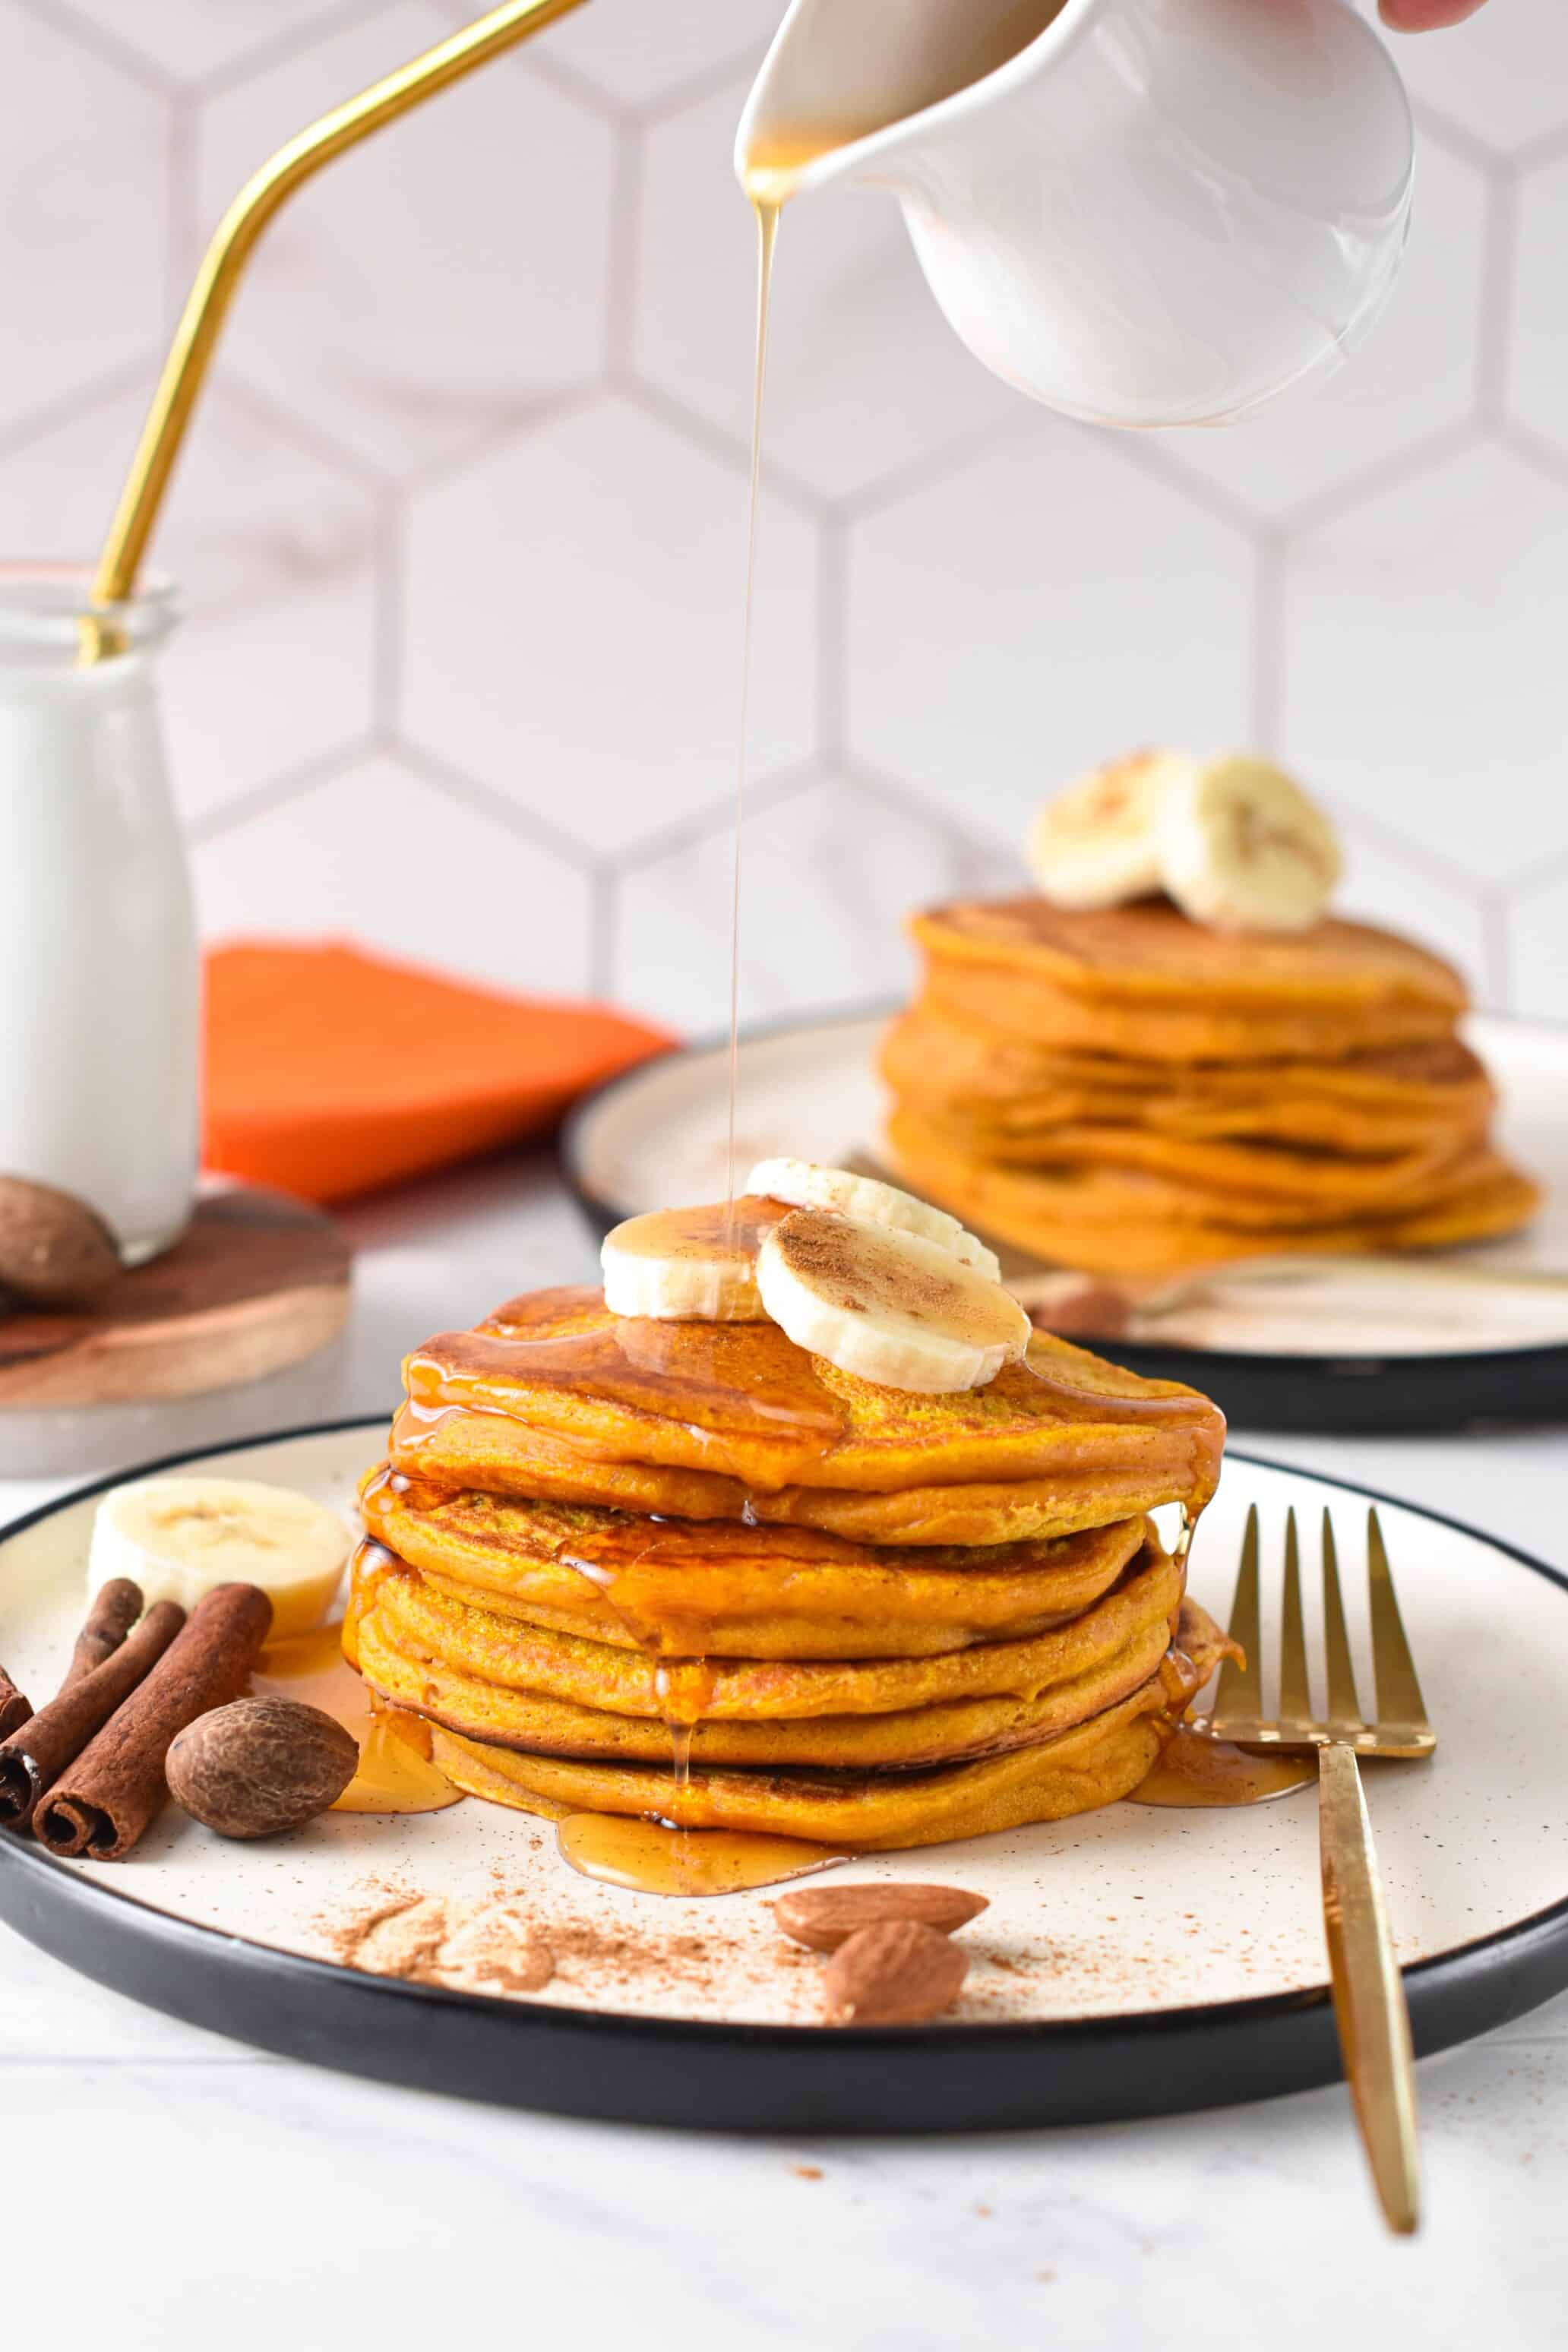 Pumpkin Protein Pancakes stacked on a plate with banana slices, cinnamon sticks, and a drizzle of maple syrup.